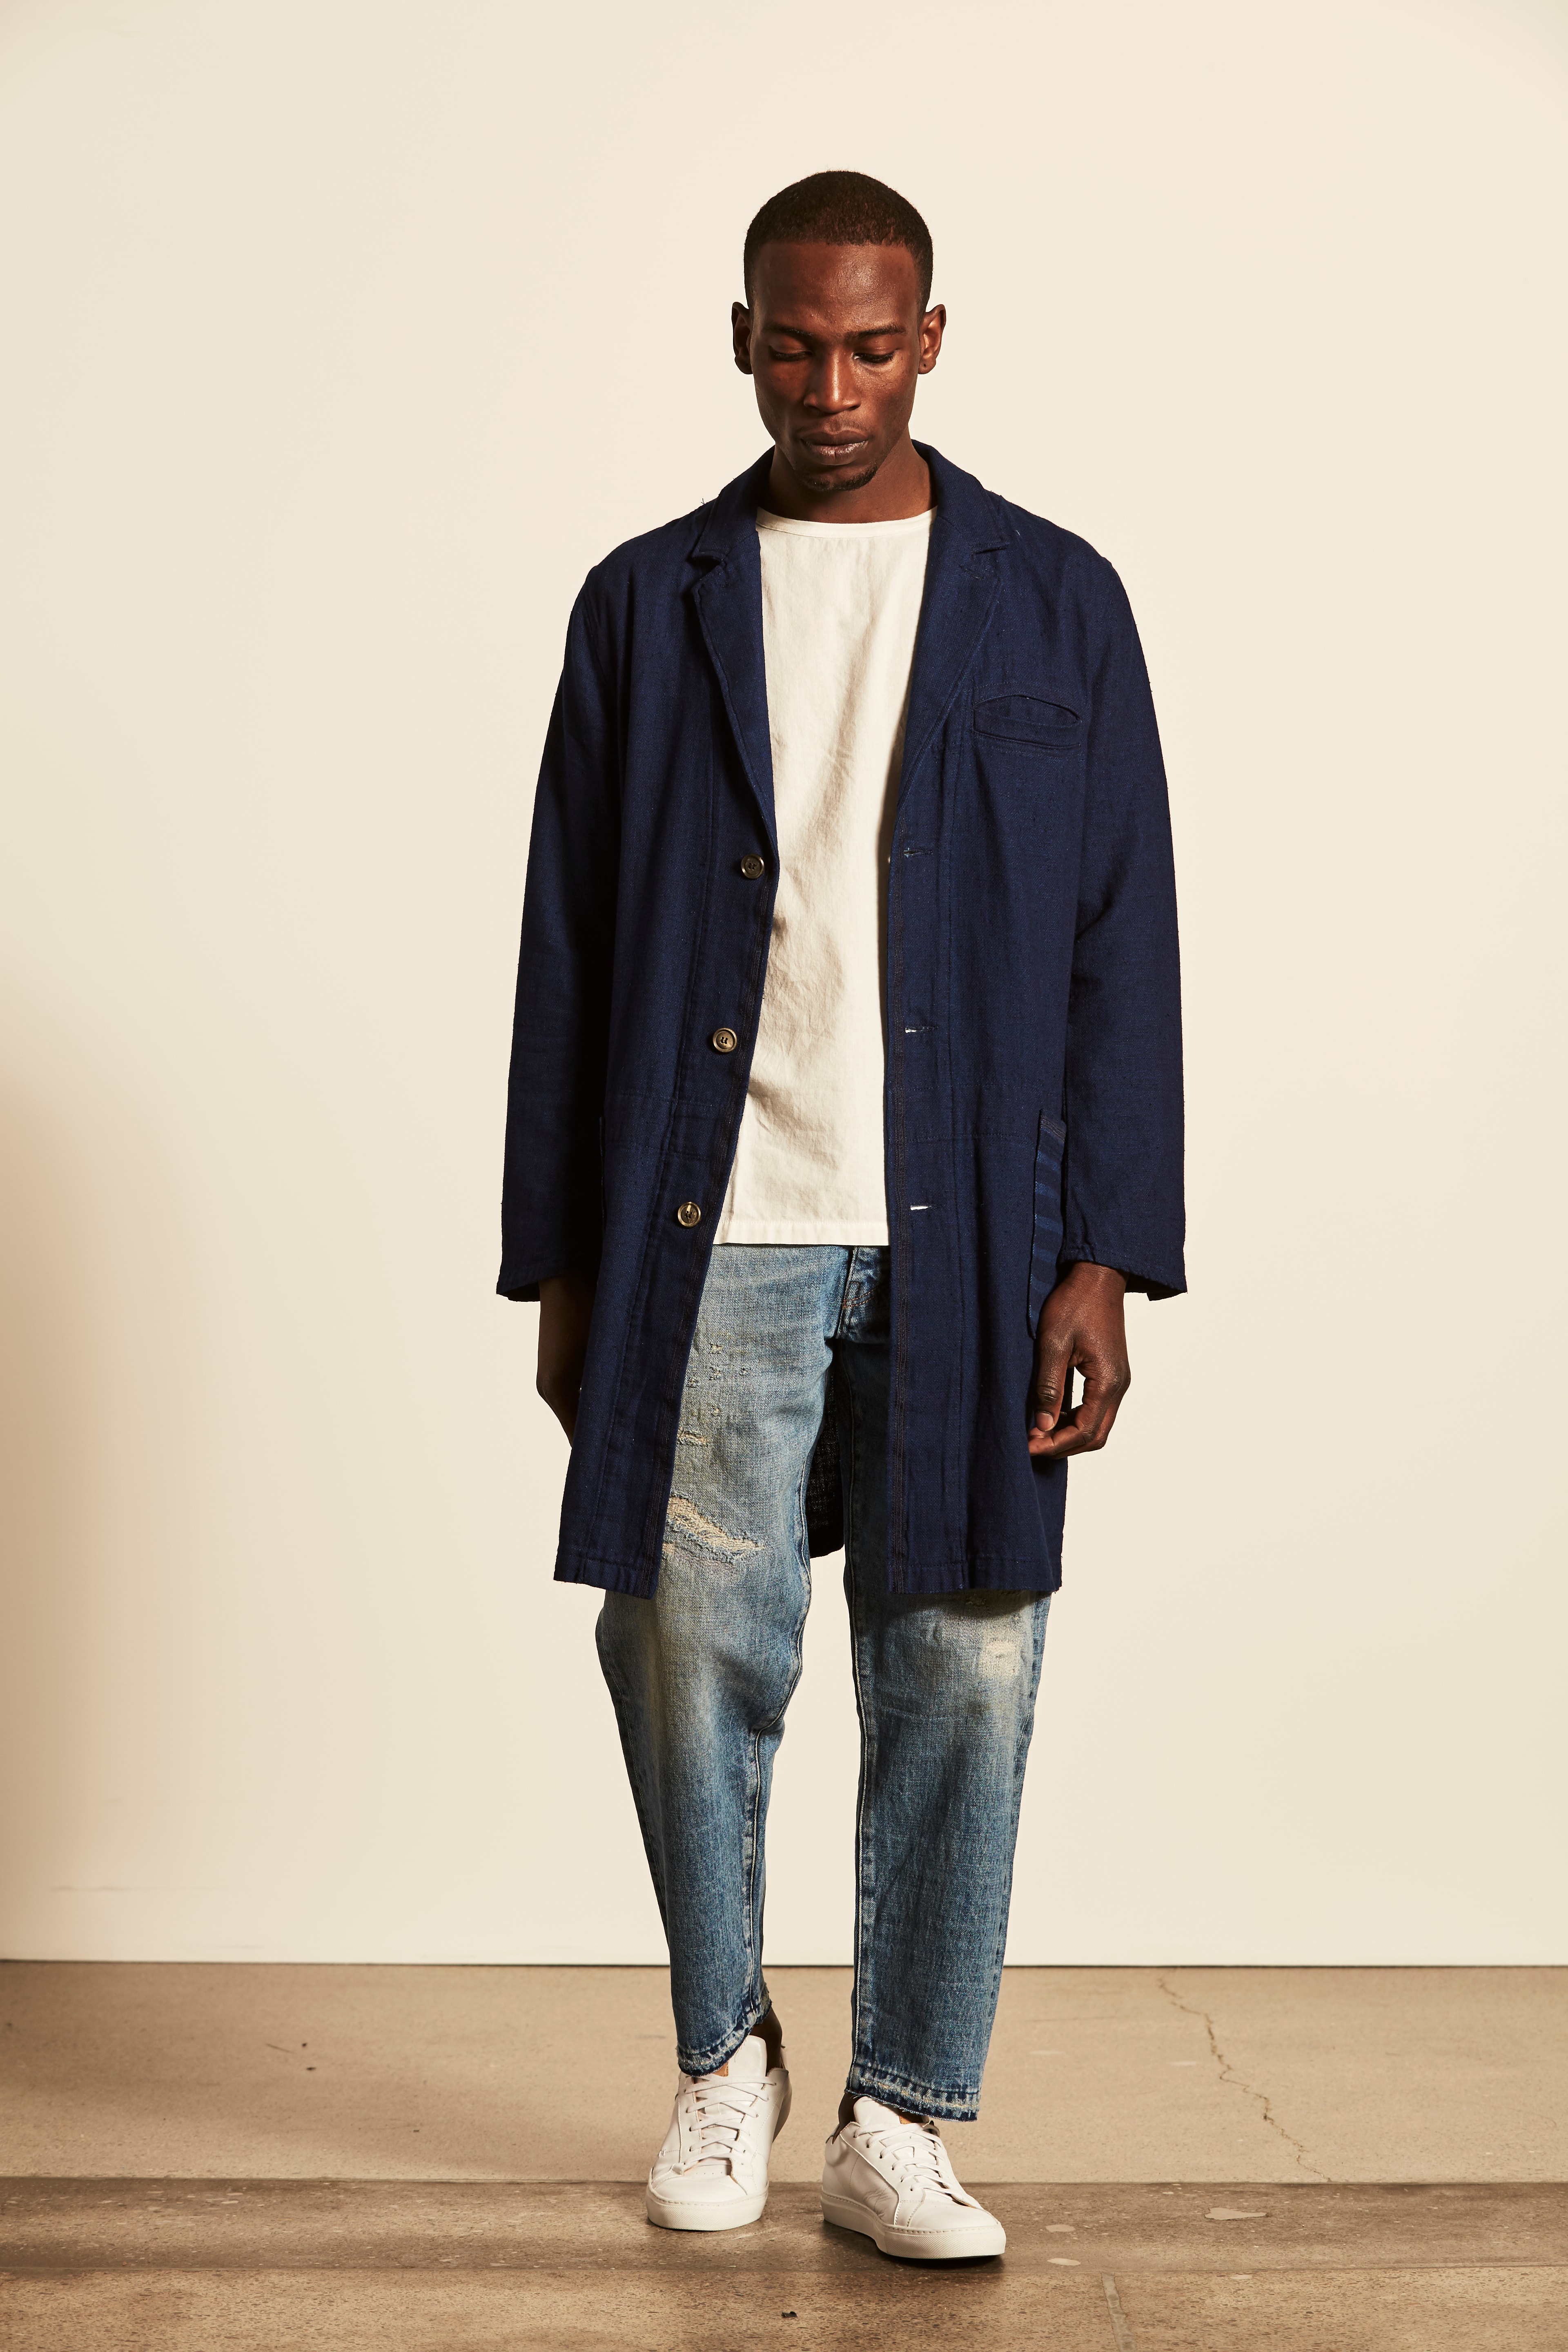 L'Exception Concept Store Magasin Paris Levi's Made And Crafted Josh Peskowitz